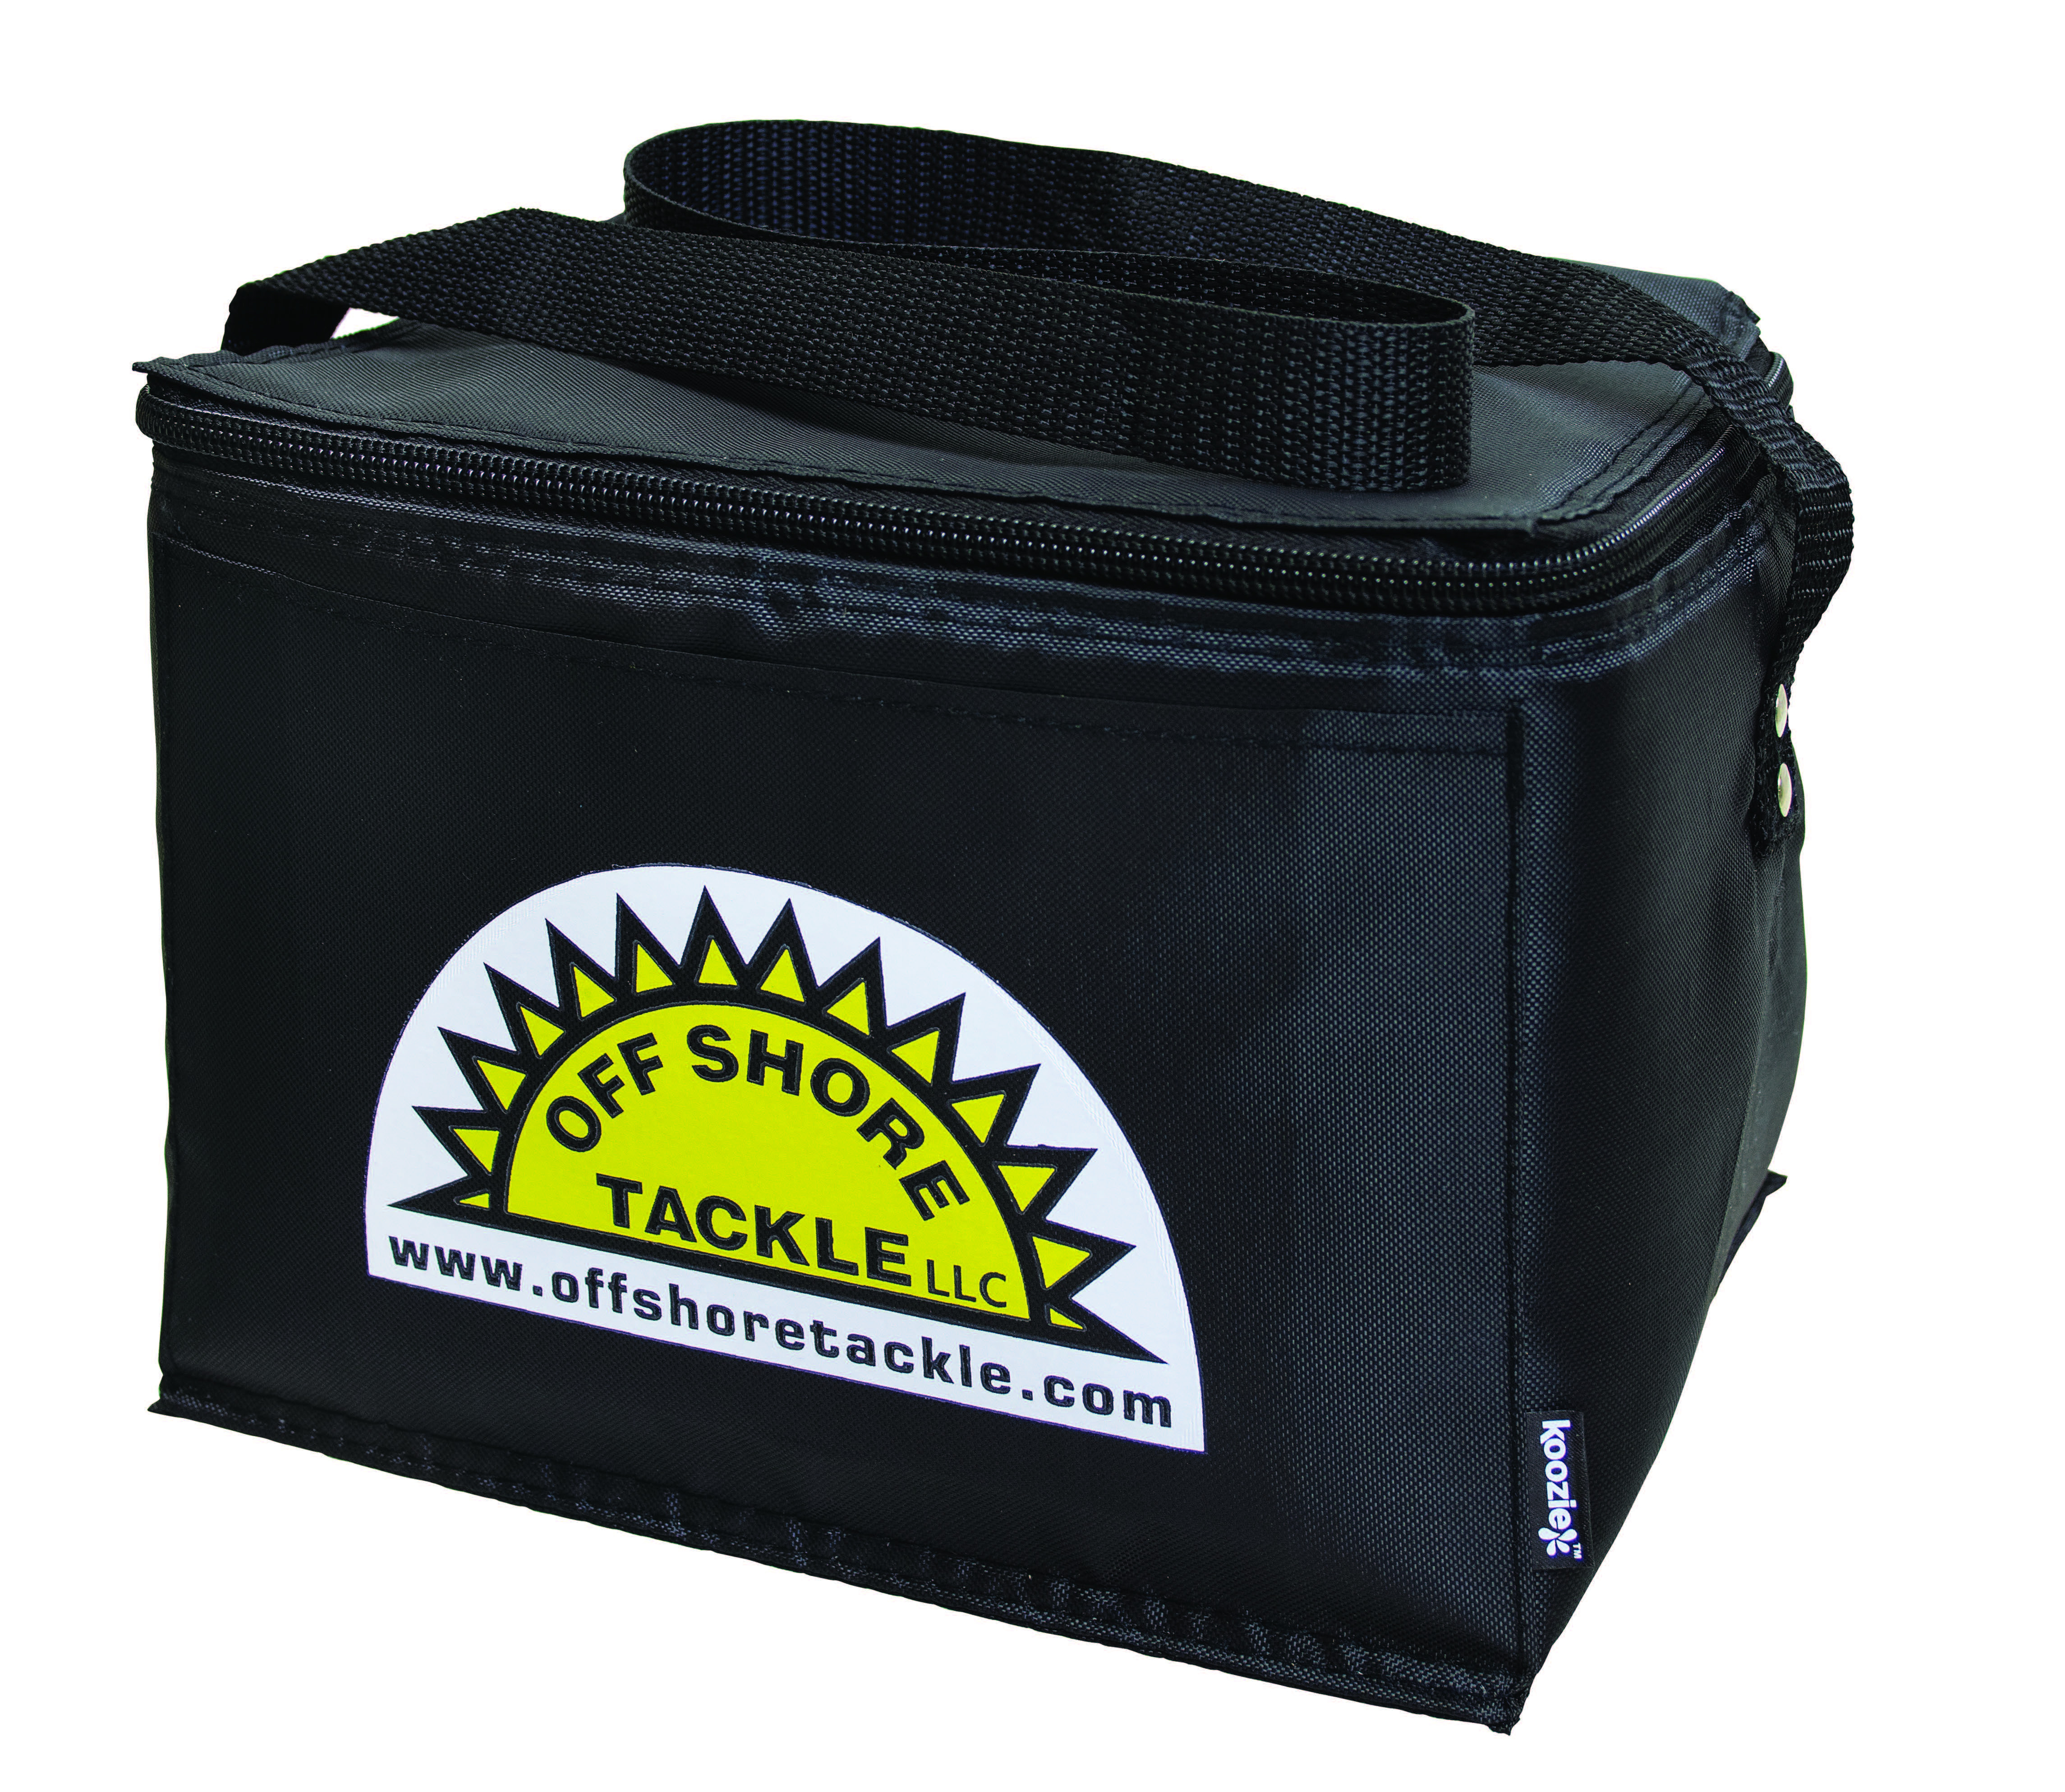 Off Shore Tackle Black Soft 6 Pack Cooler With Front Pocket And Colored  Silkscreen Logo - CLR , Off Shore Tackle